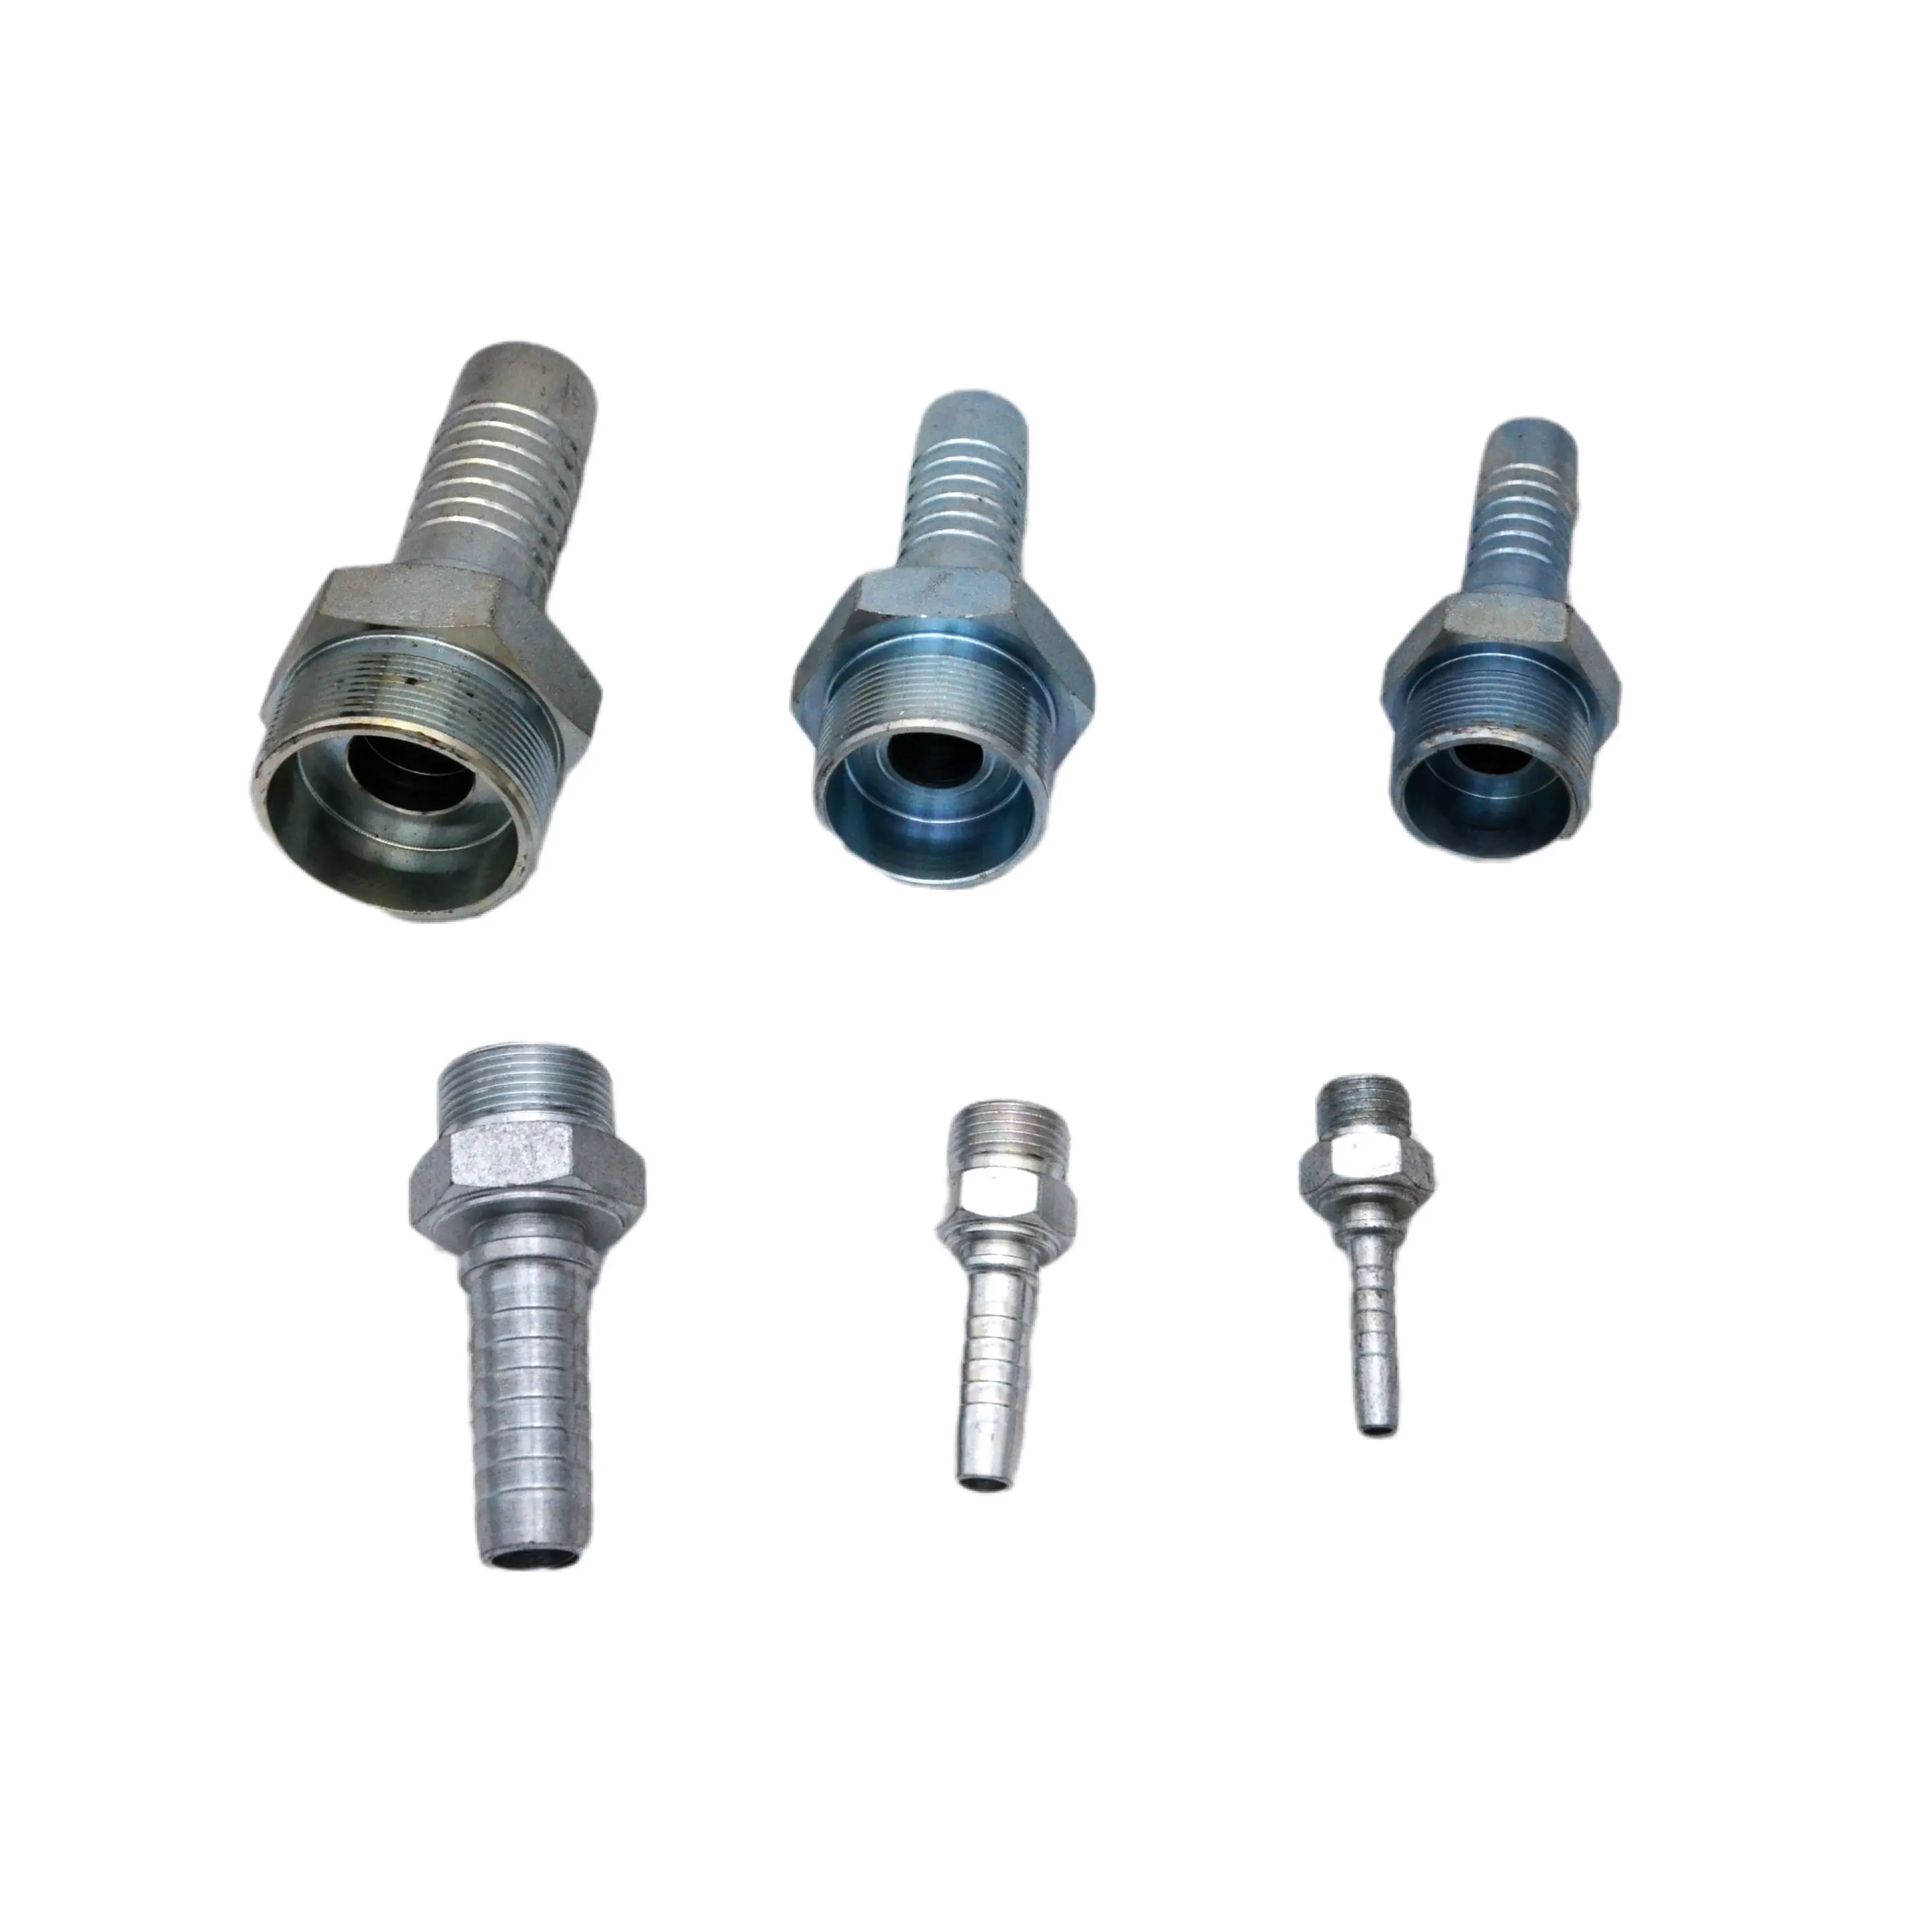 Hydraulic Hose Fitting External Male Threaded Copper various hydraulic hose ferrule fittings and connectors